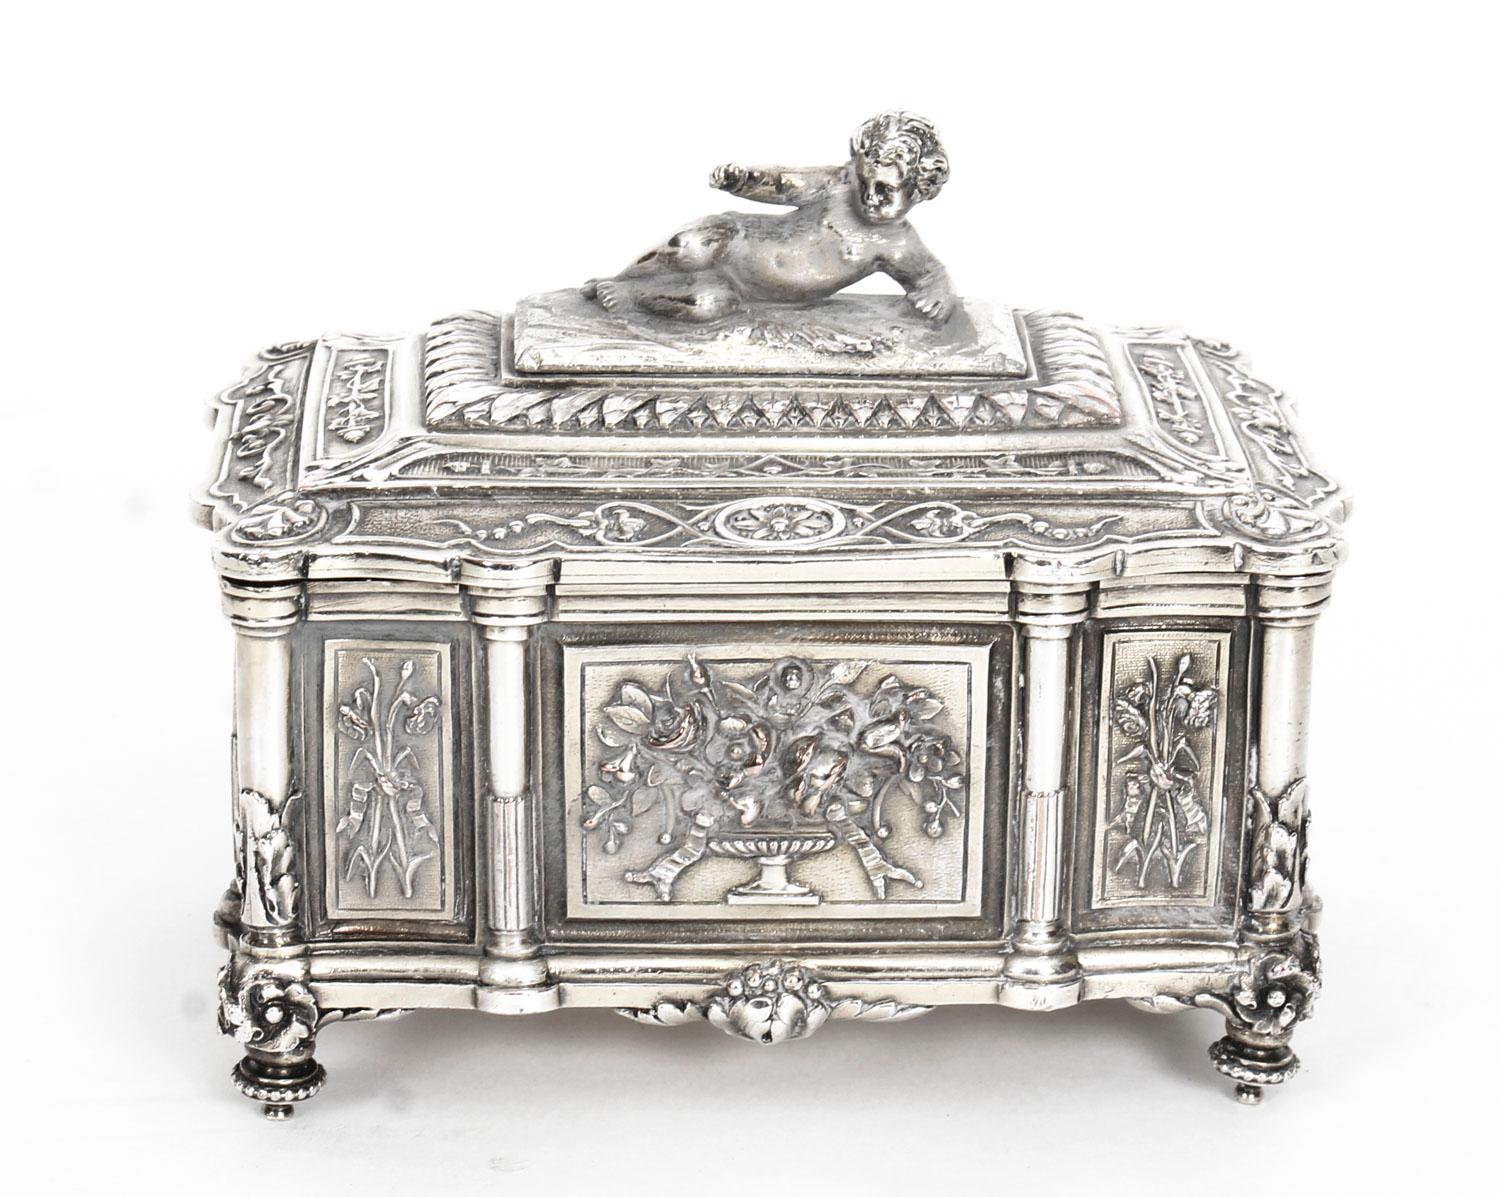 This is a beautiful antique Victorian silver plated casket bearing the incised stamped makers mark of the world renowned silversmith firm Mappin & Webb, circa 1880 in date.
 
This wonderful casket is of very high quality and features superb